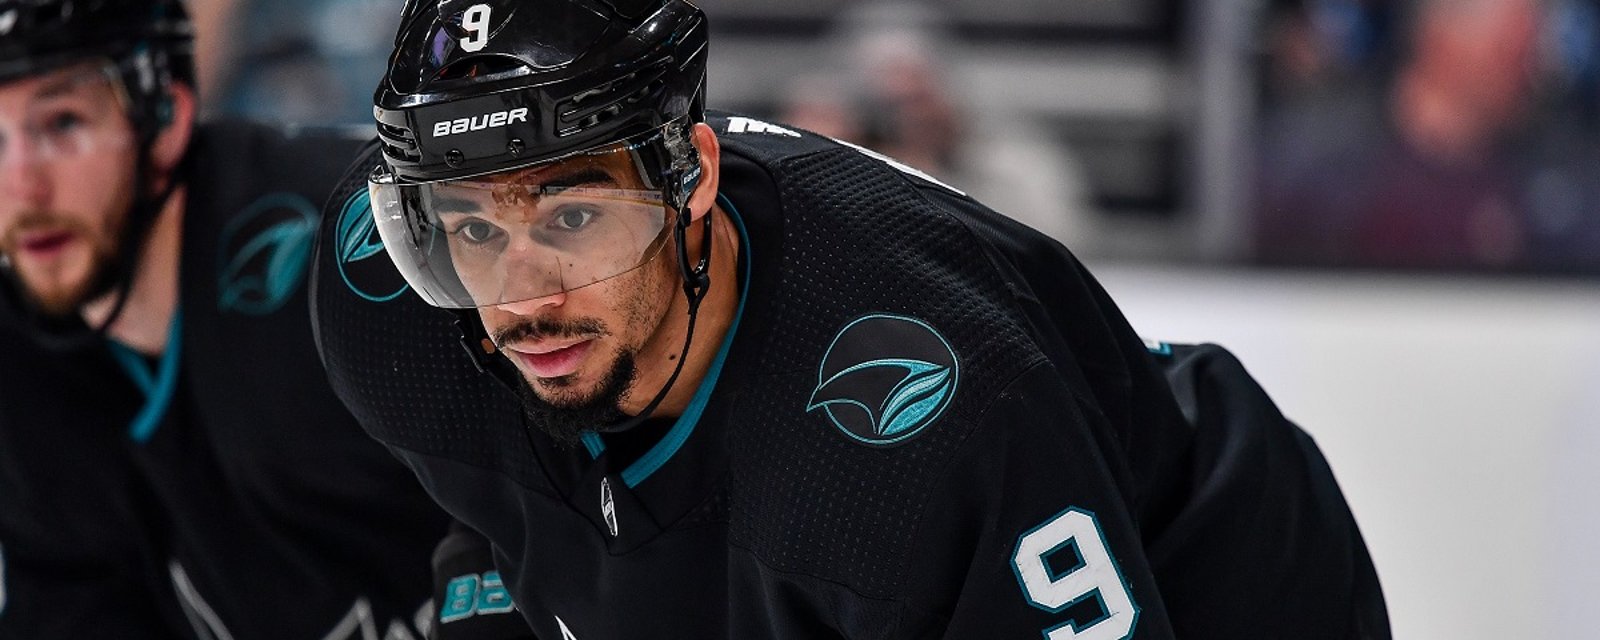 Evander Kane blasts analyst over “racist” comments on Sirius/XM NHL Network.